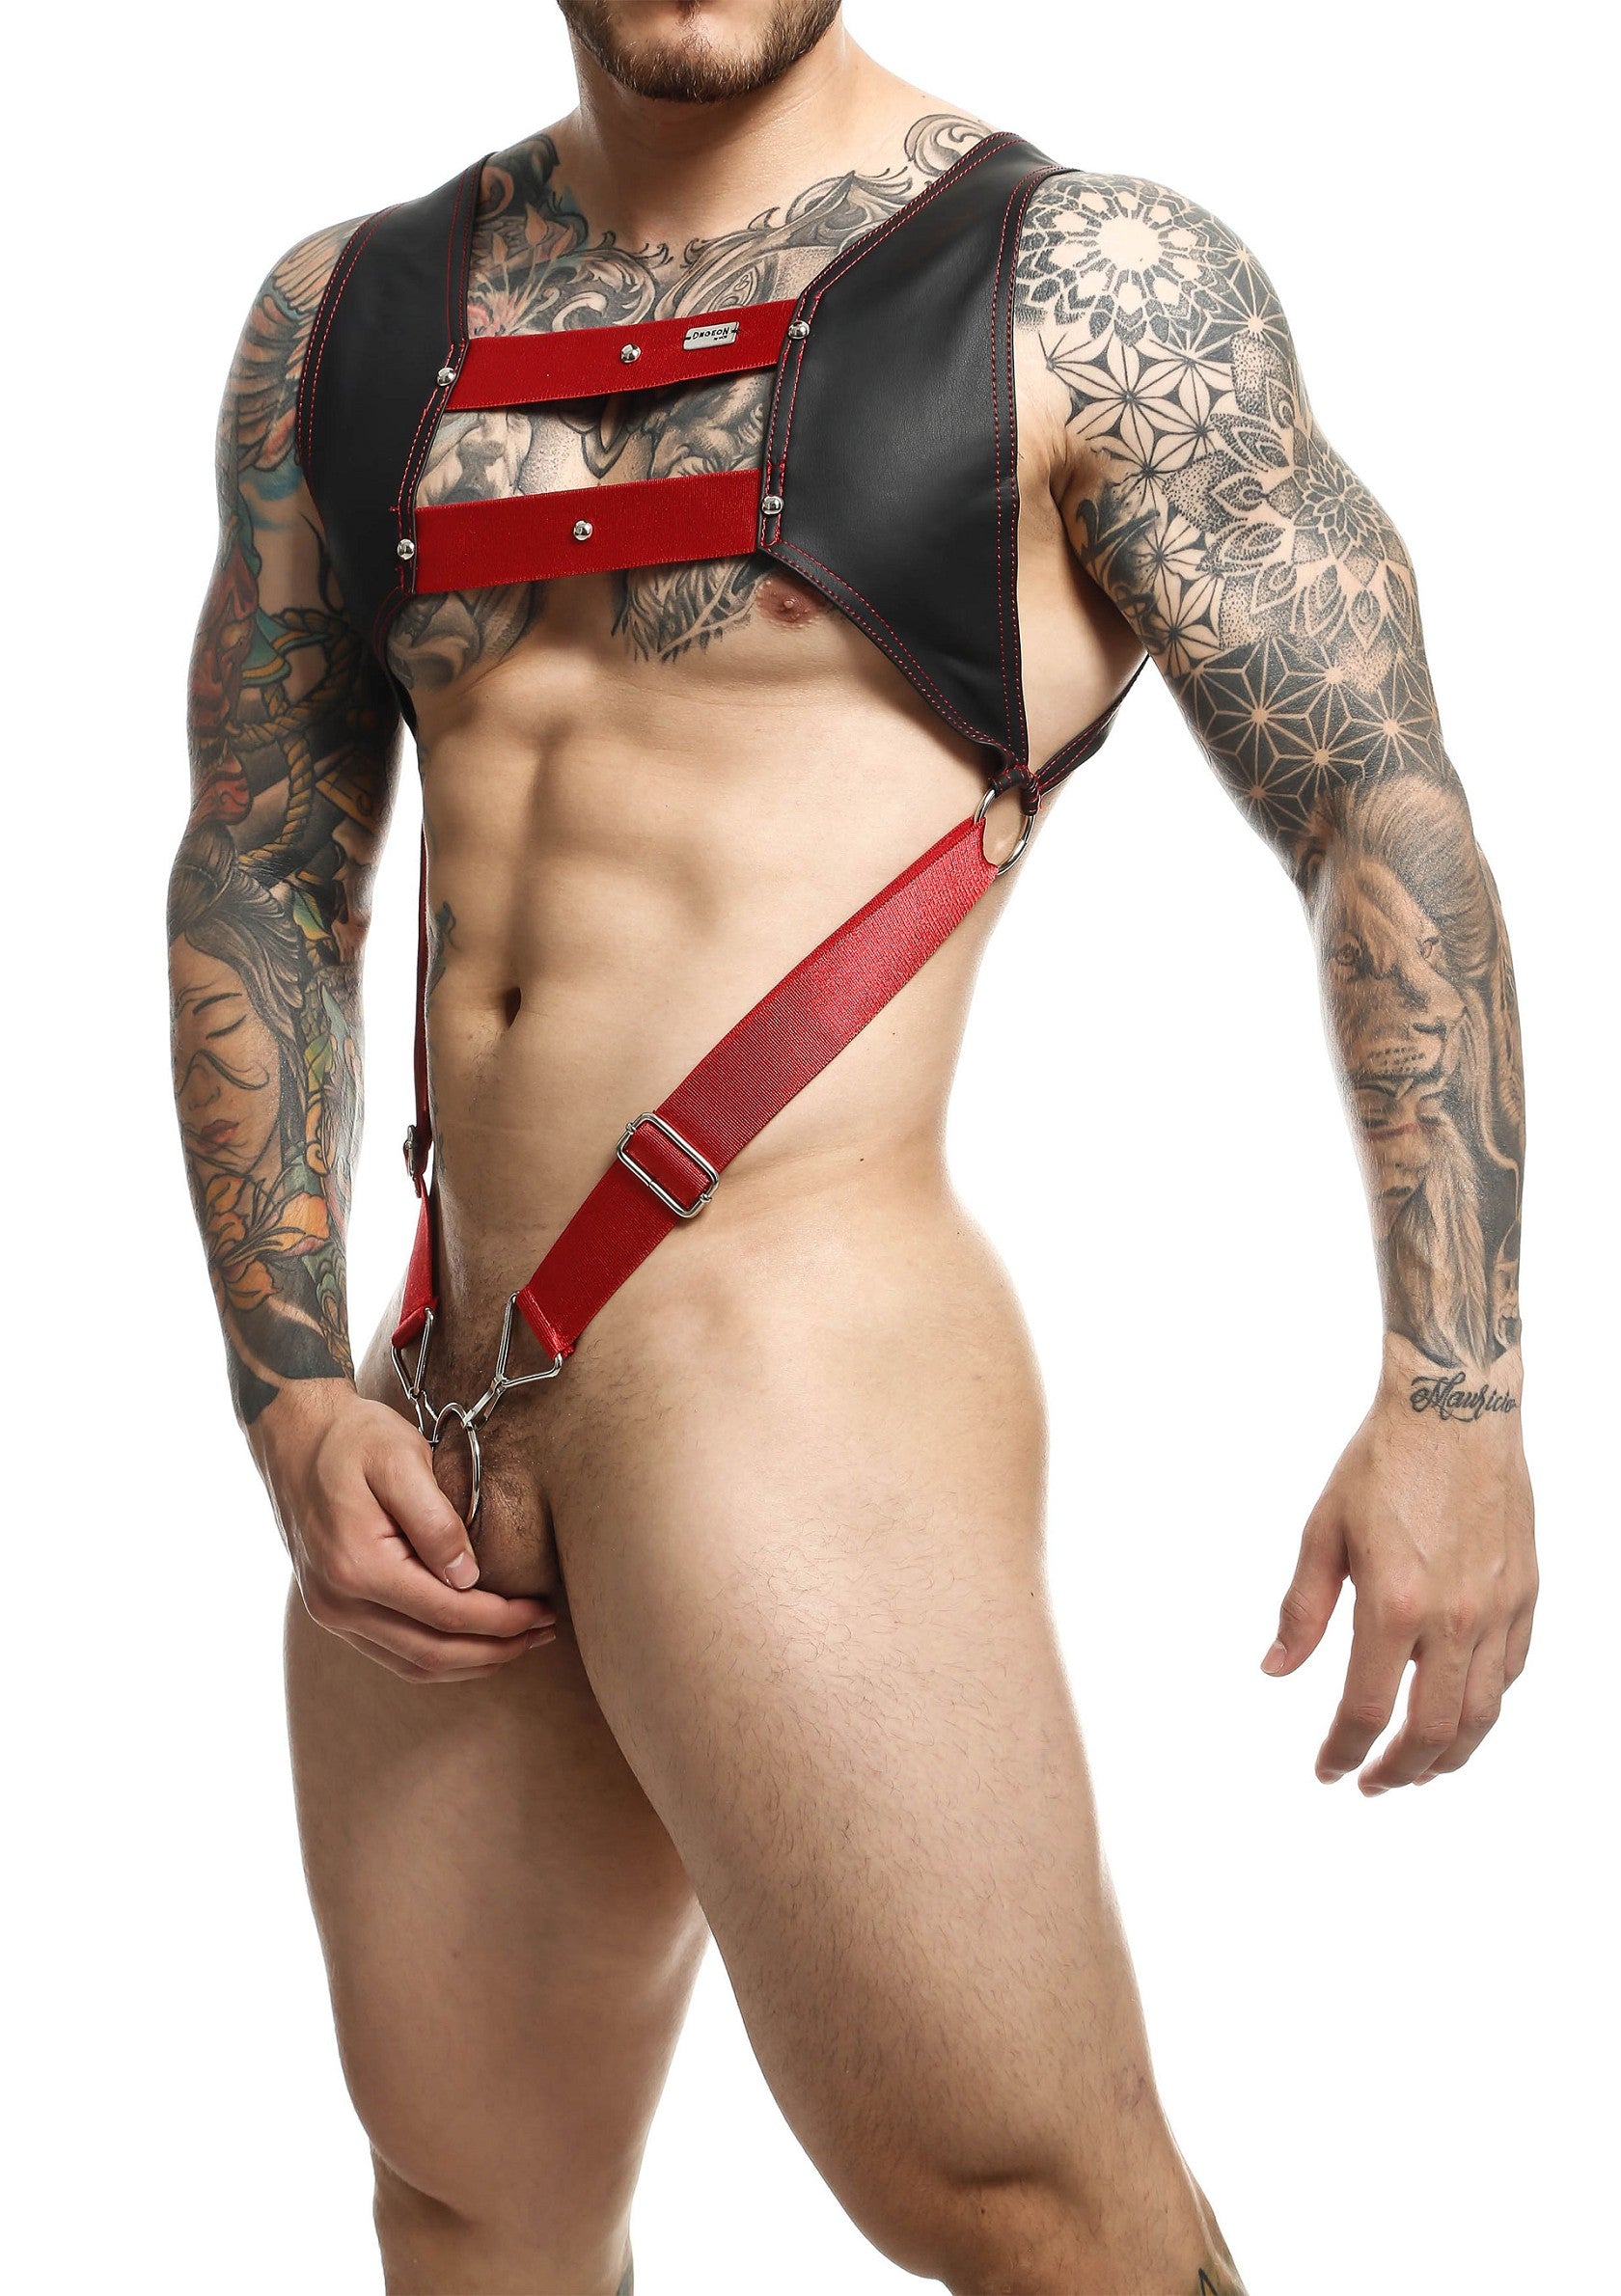 MOB Eroticwear Dngeon Top Cockring Harness RED O/S - 5